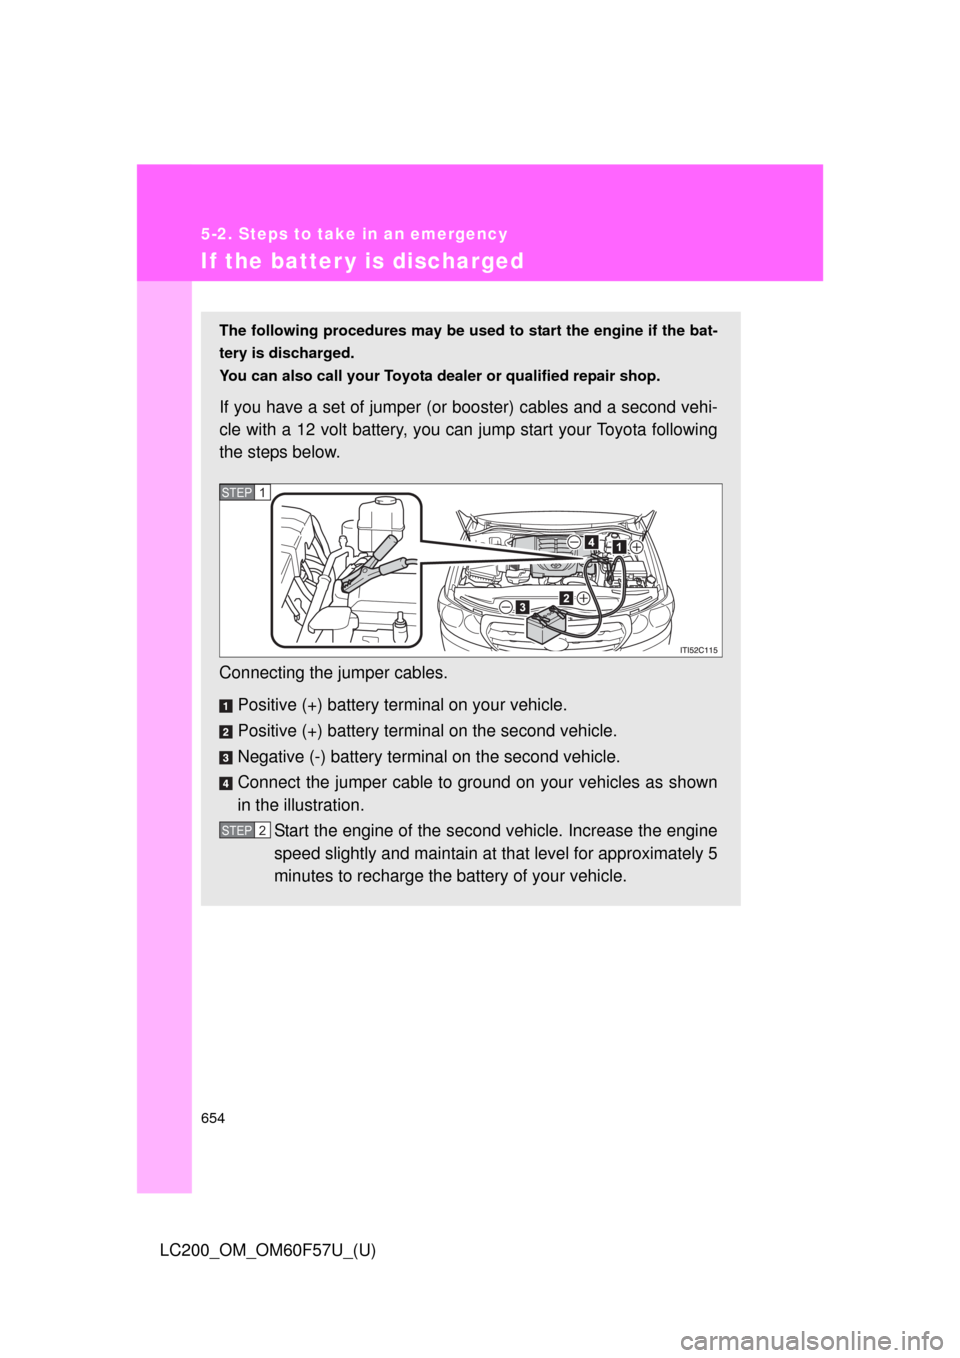 TOYOTA LAND CRUISER 2013 J200 Owners Manual 654
5-2. Steps to take in an emergency
LC200_OM_OM60F57U_(U)
If the batter y is discharged
The following procedures may be used to start the engine if the bat-
tery is discharged.
You can also call yo